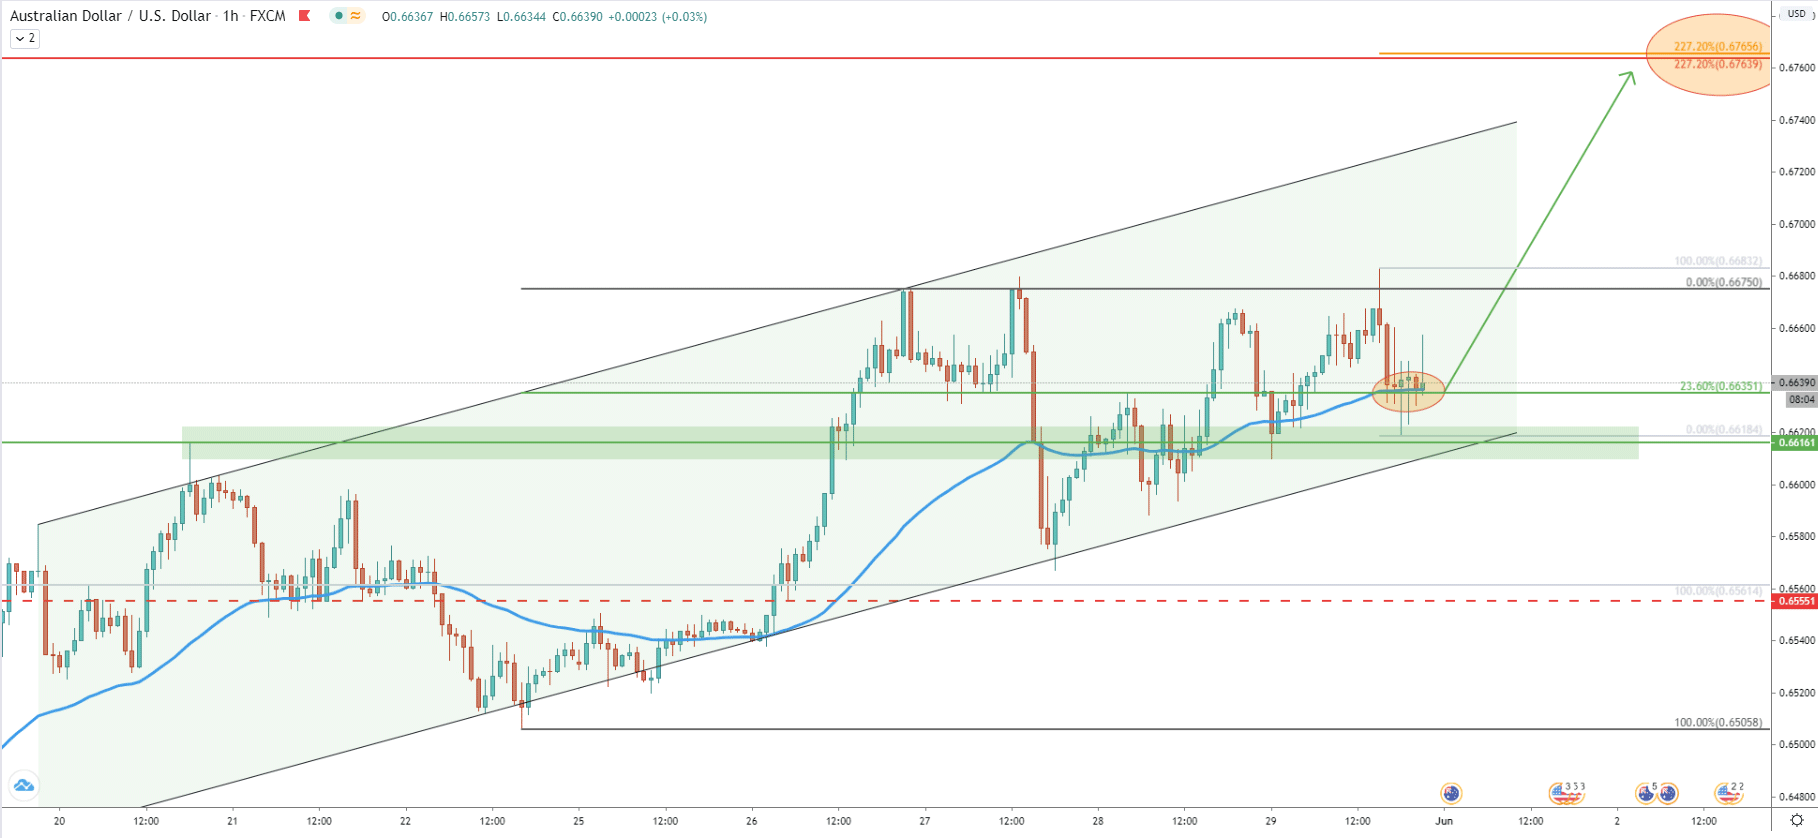 AUD/USD 1-Hour Technical Analysis 29 May 2020